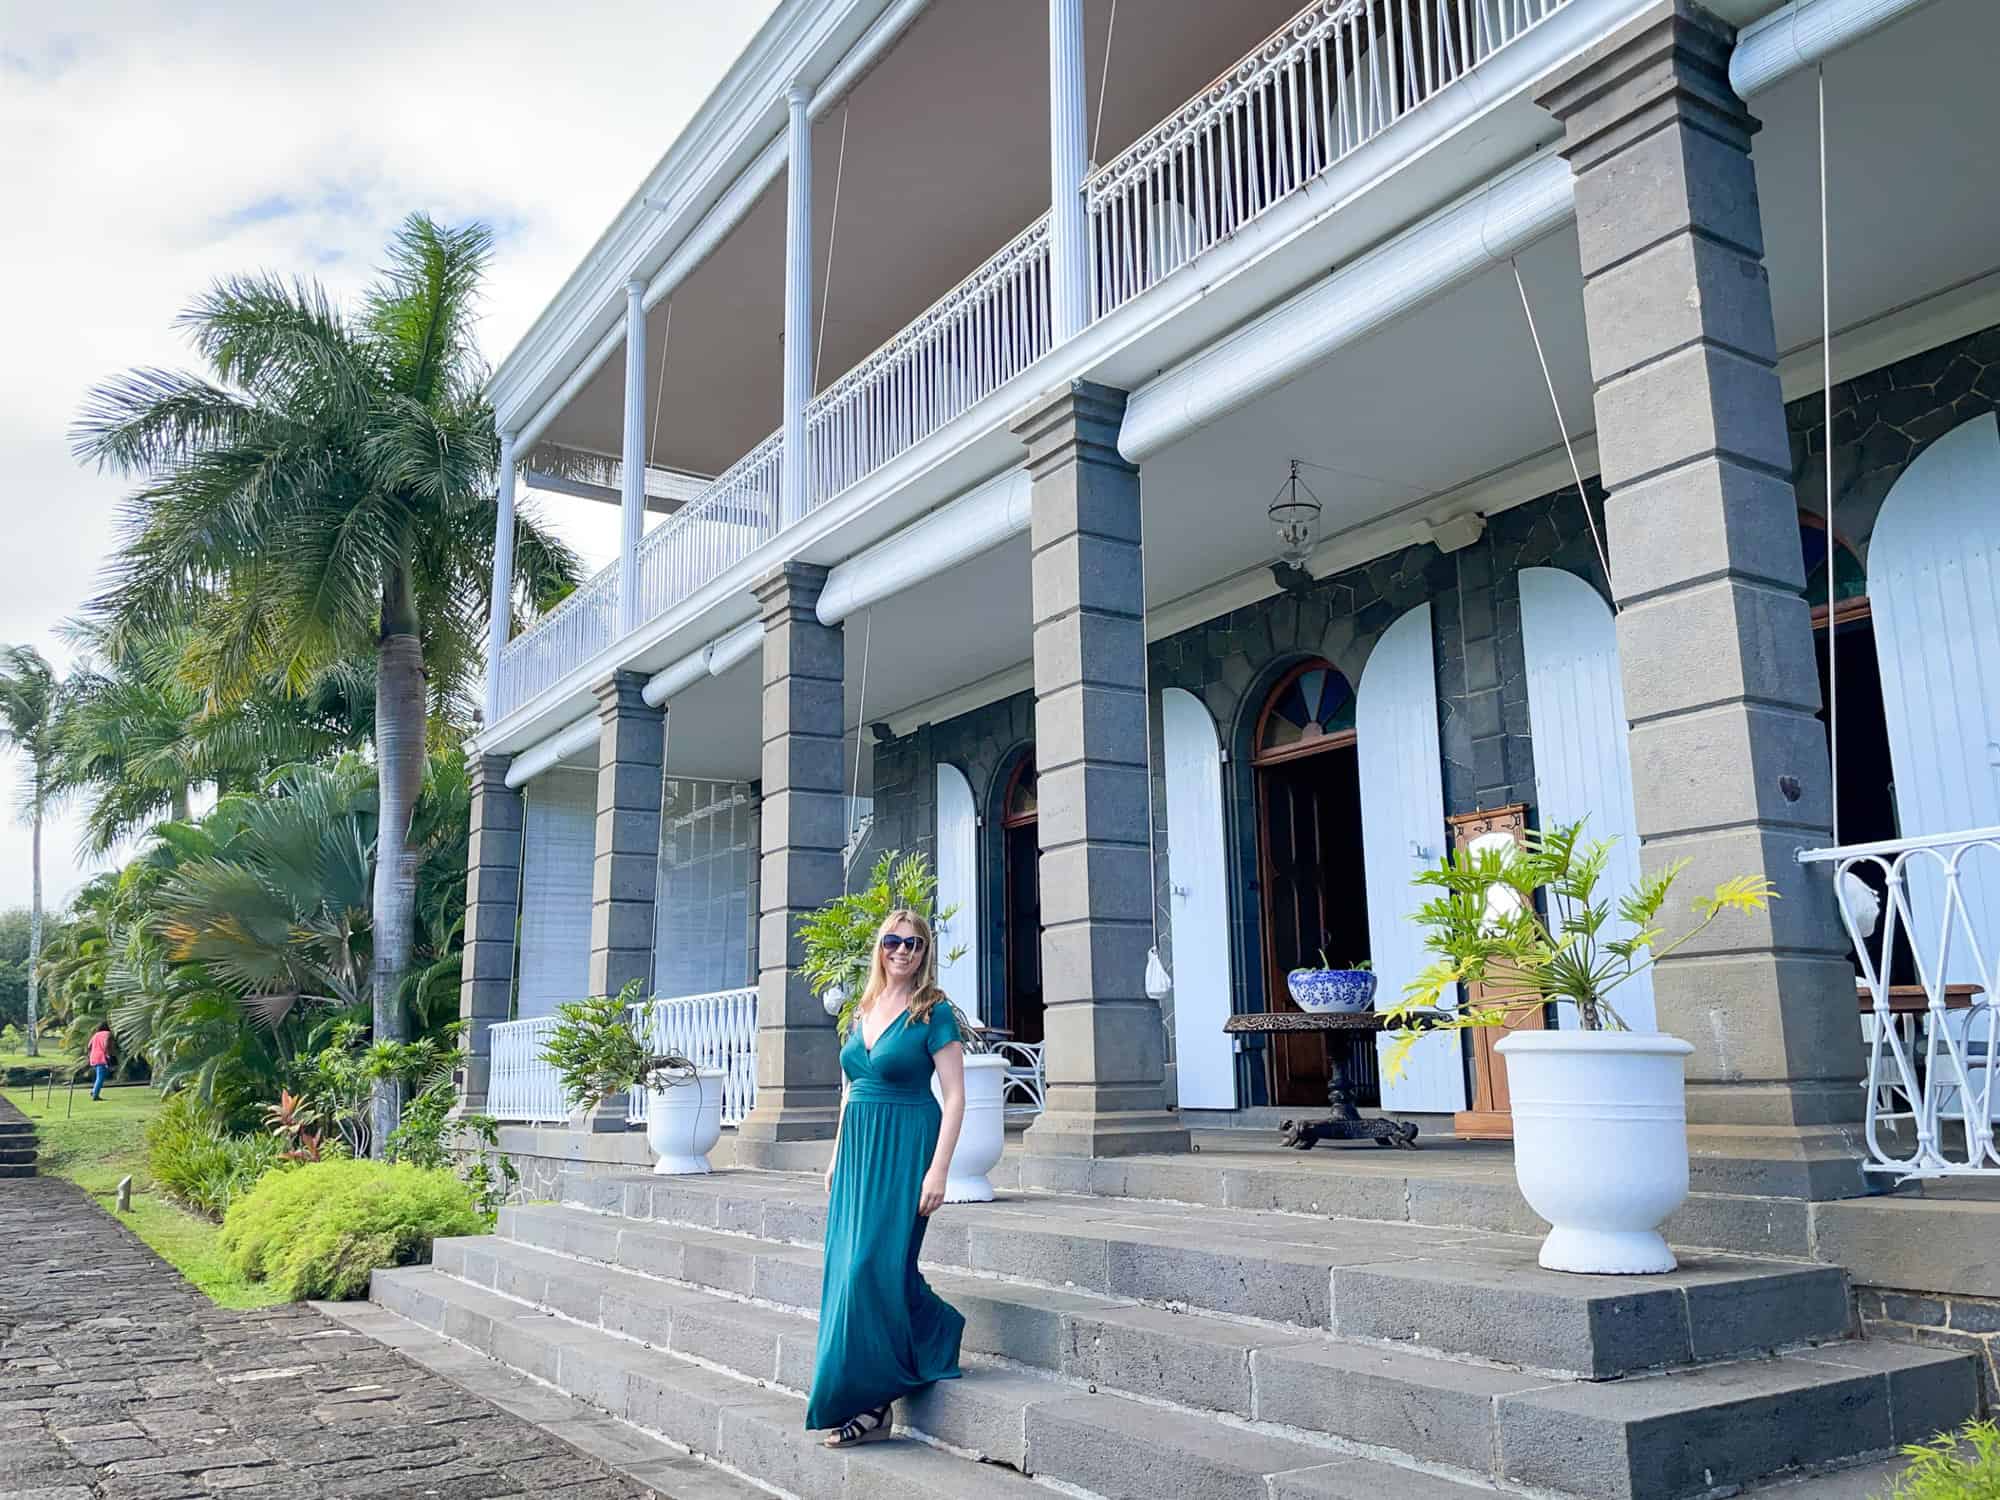 Mauritius - Chateau Bel Ombre - Abigail King on the steps